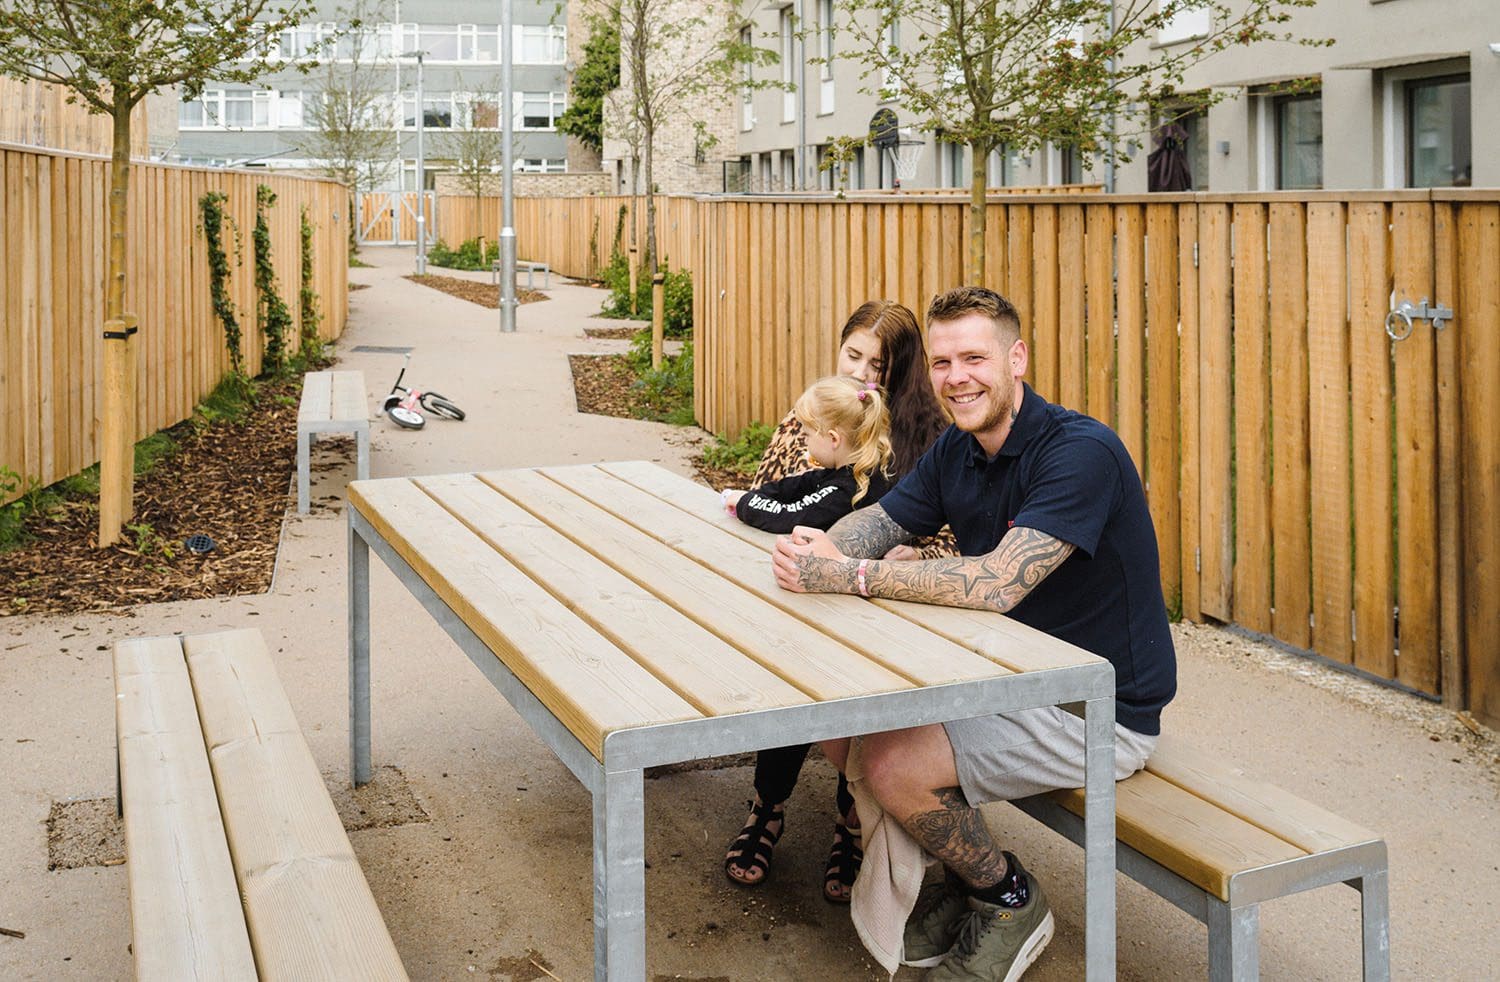 Outdoor wooden picnic table and matching benches with metal legs, happy family sat on one side smiling at the camera